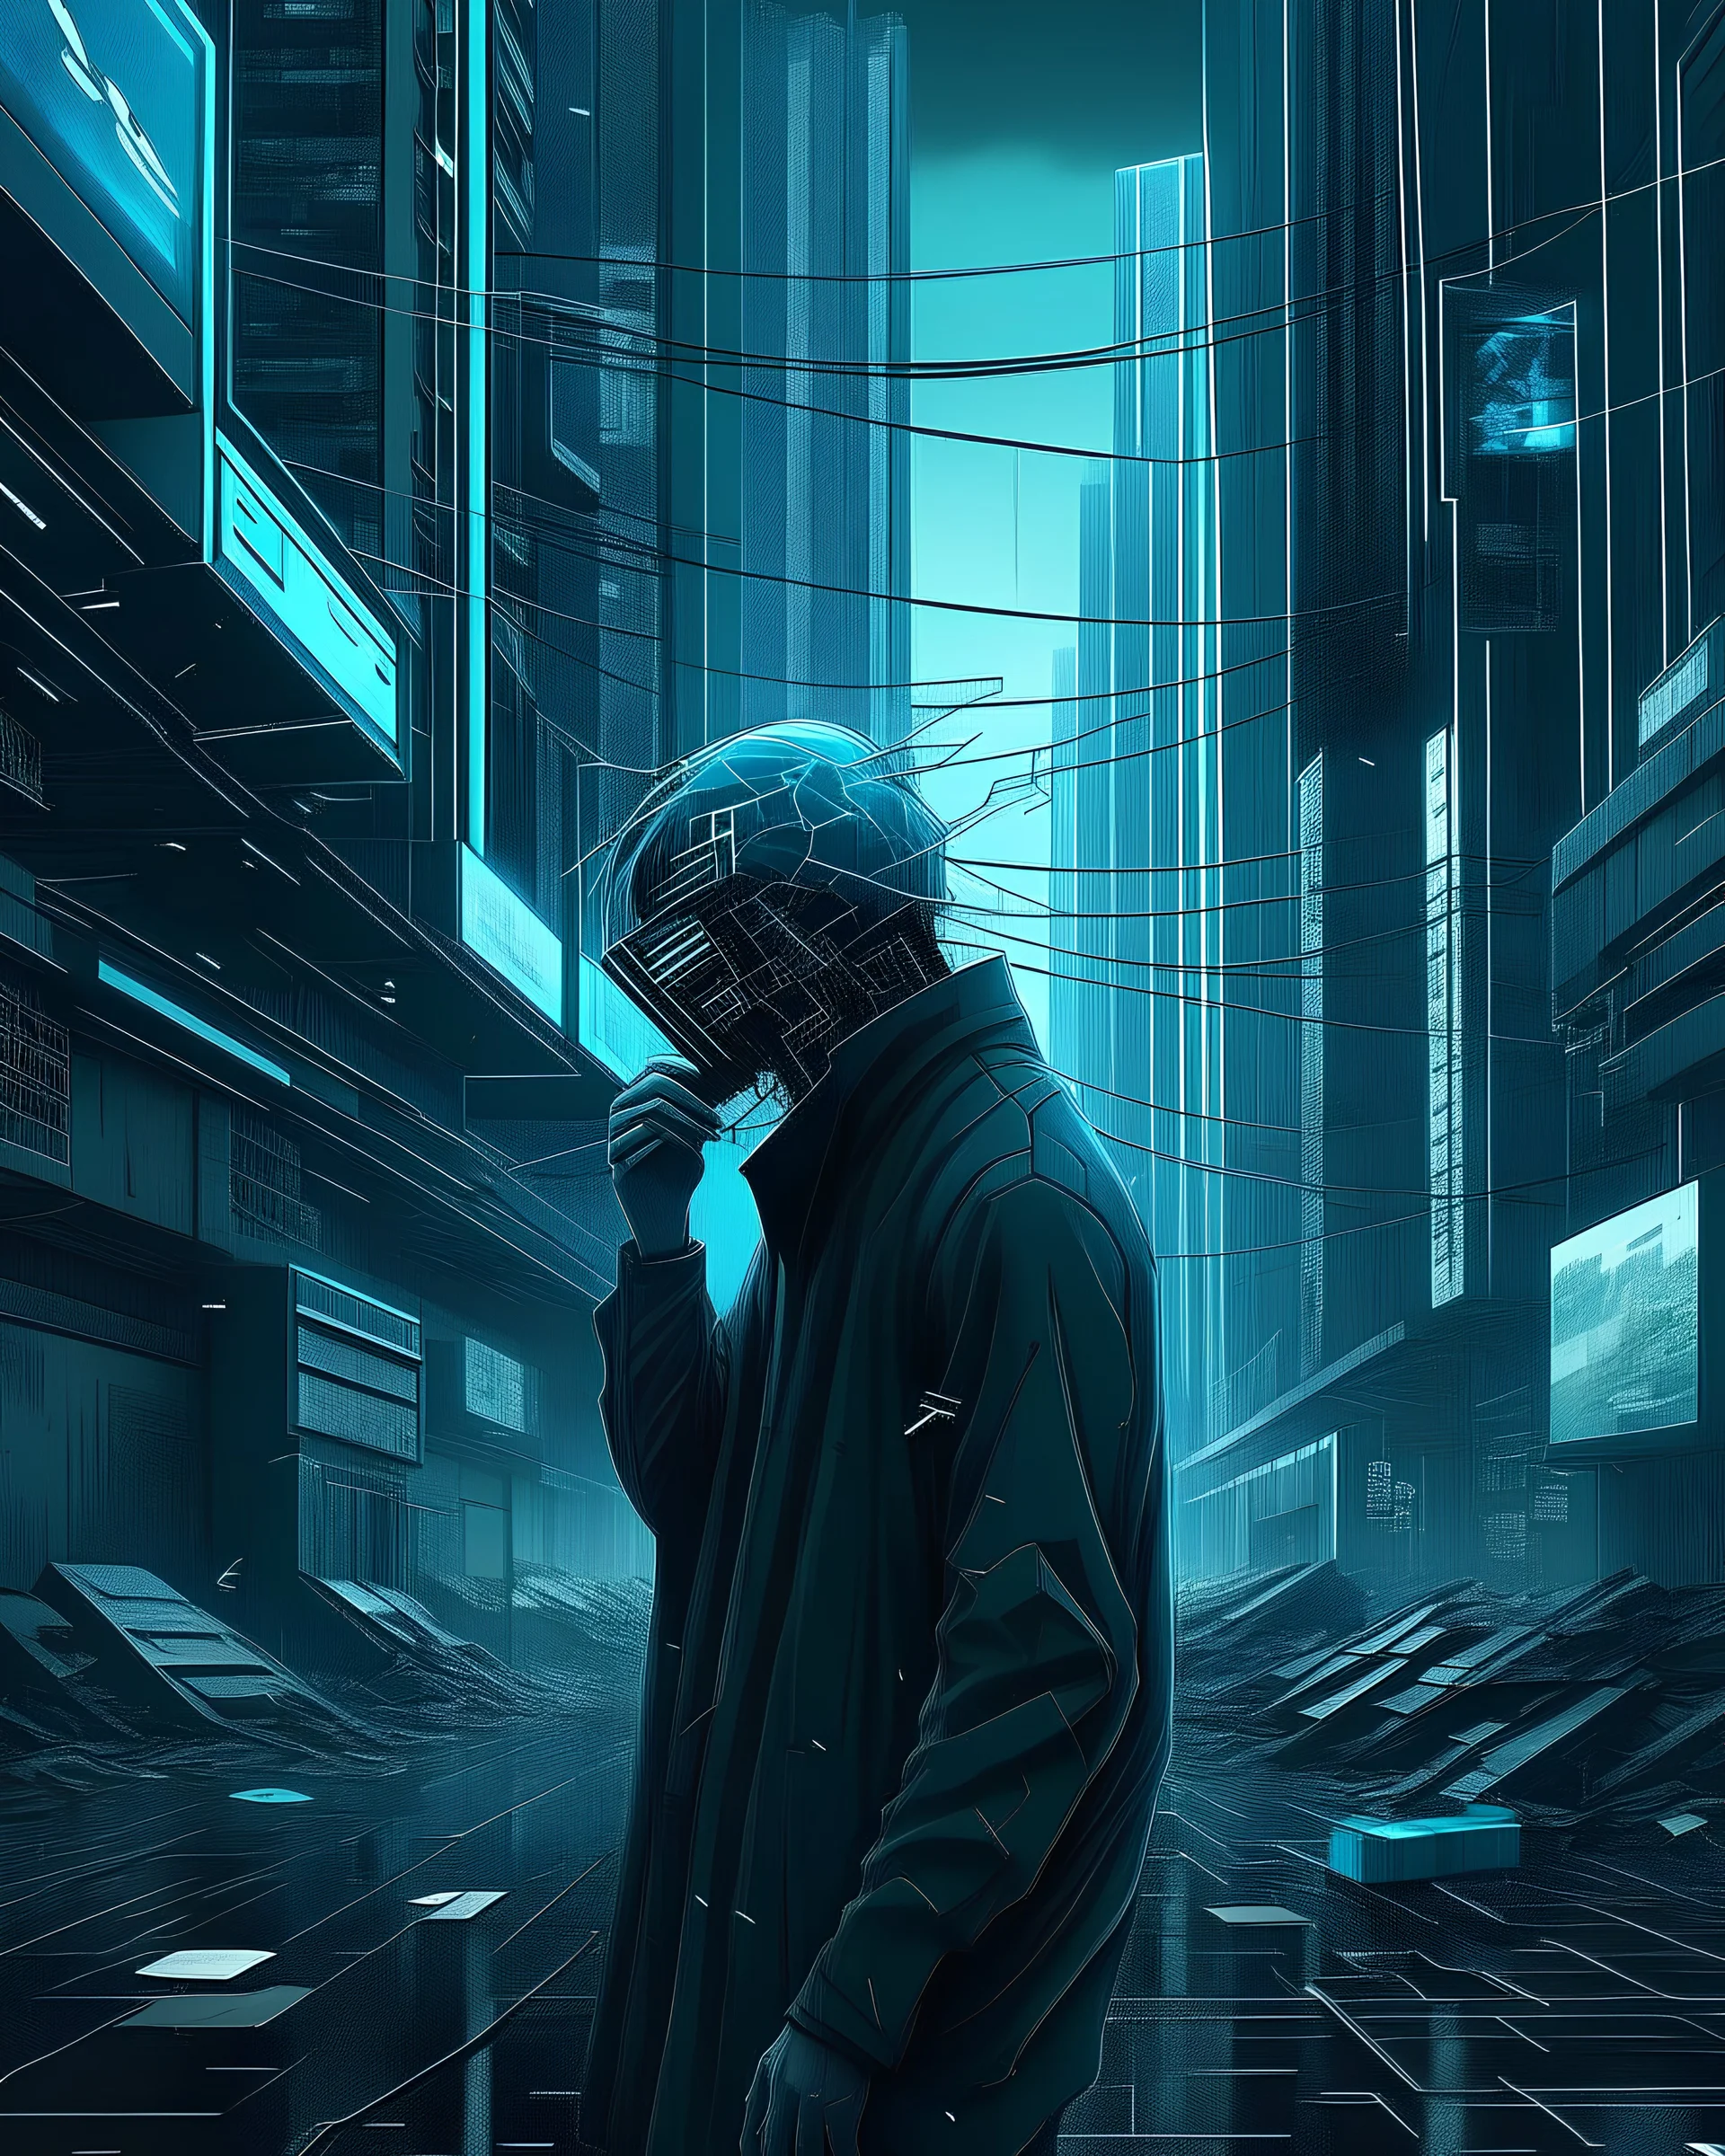 Amidst a chaotic, dystopian city overrun by digital glitches and cyber threats, a bewildered figure struggles to protect their financial data, feeling overwhelmed and confused. The atmosphere is disorienting and filled with anxiety.